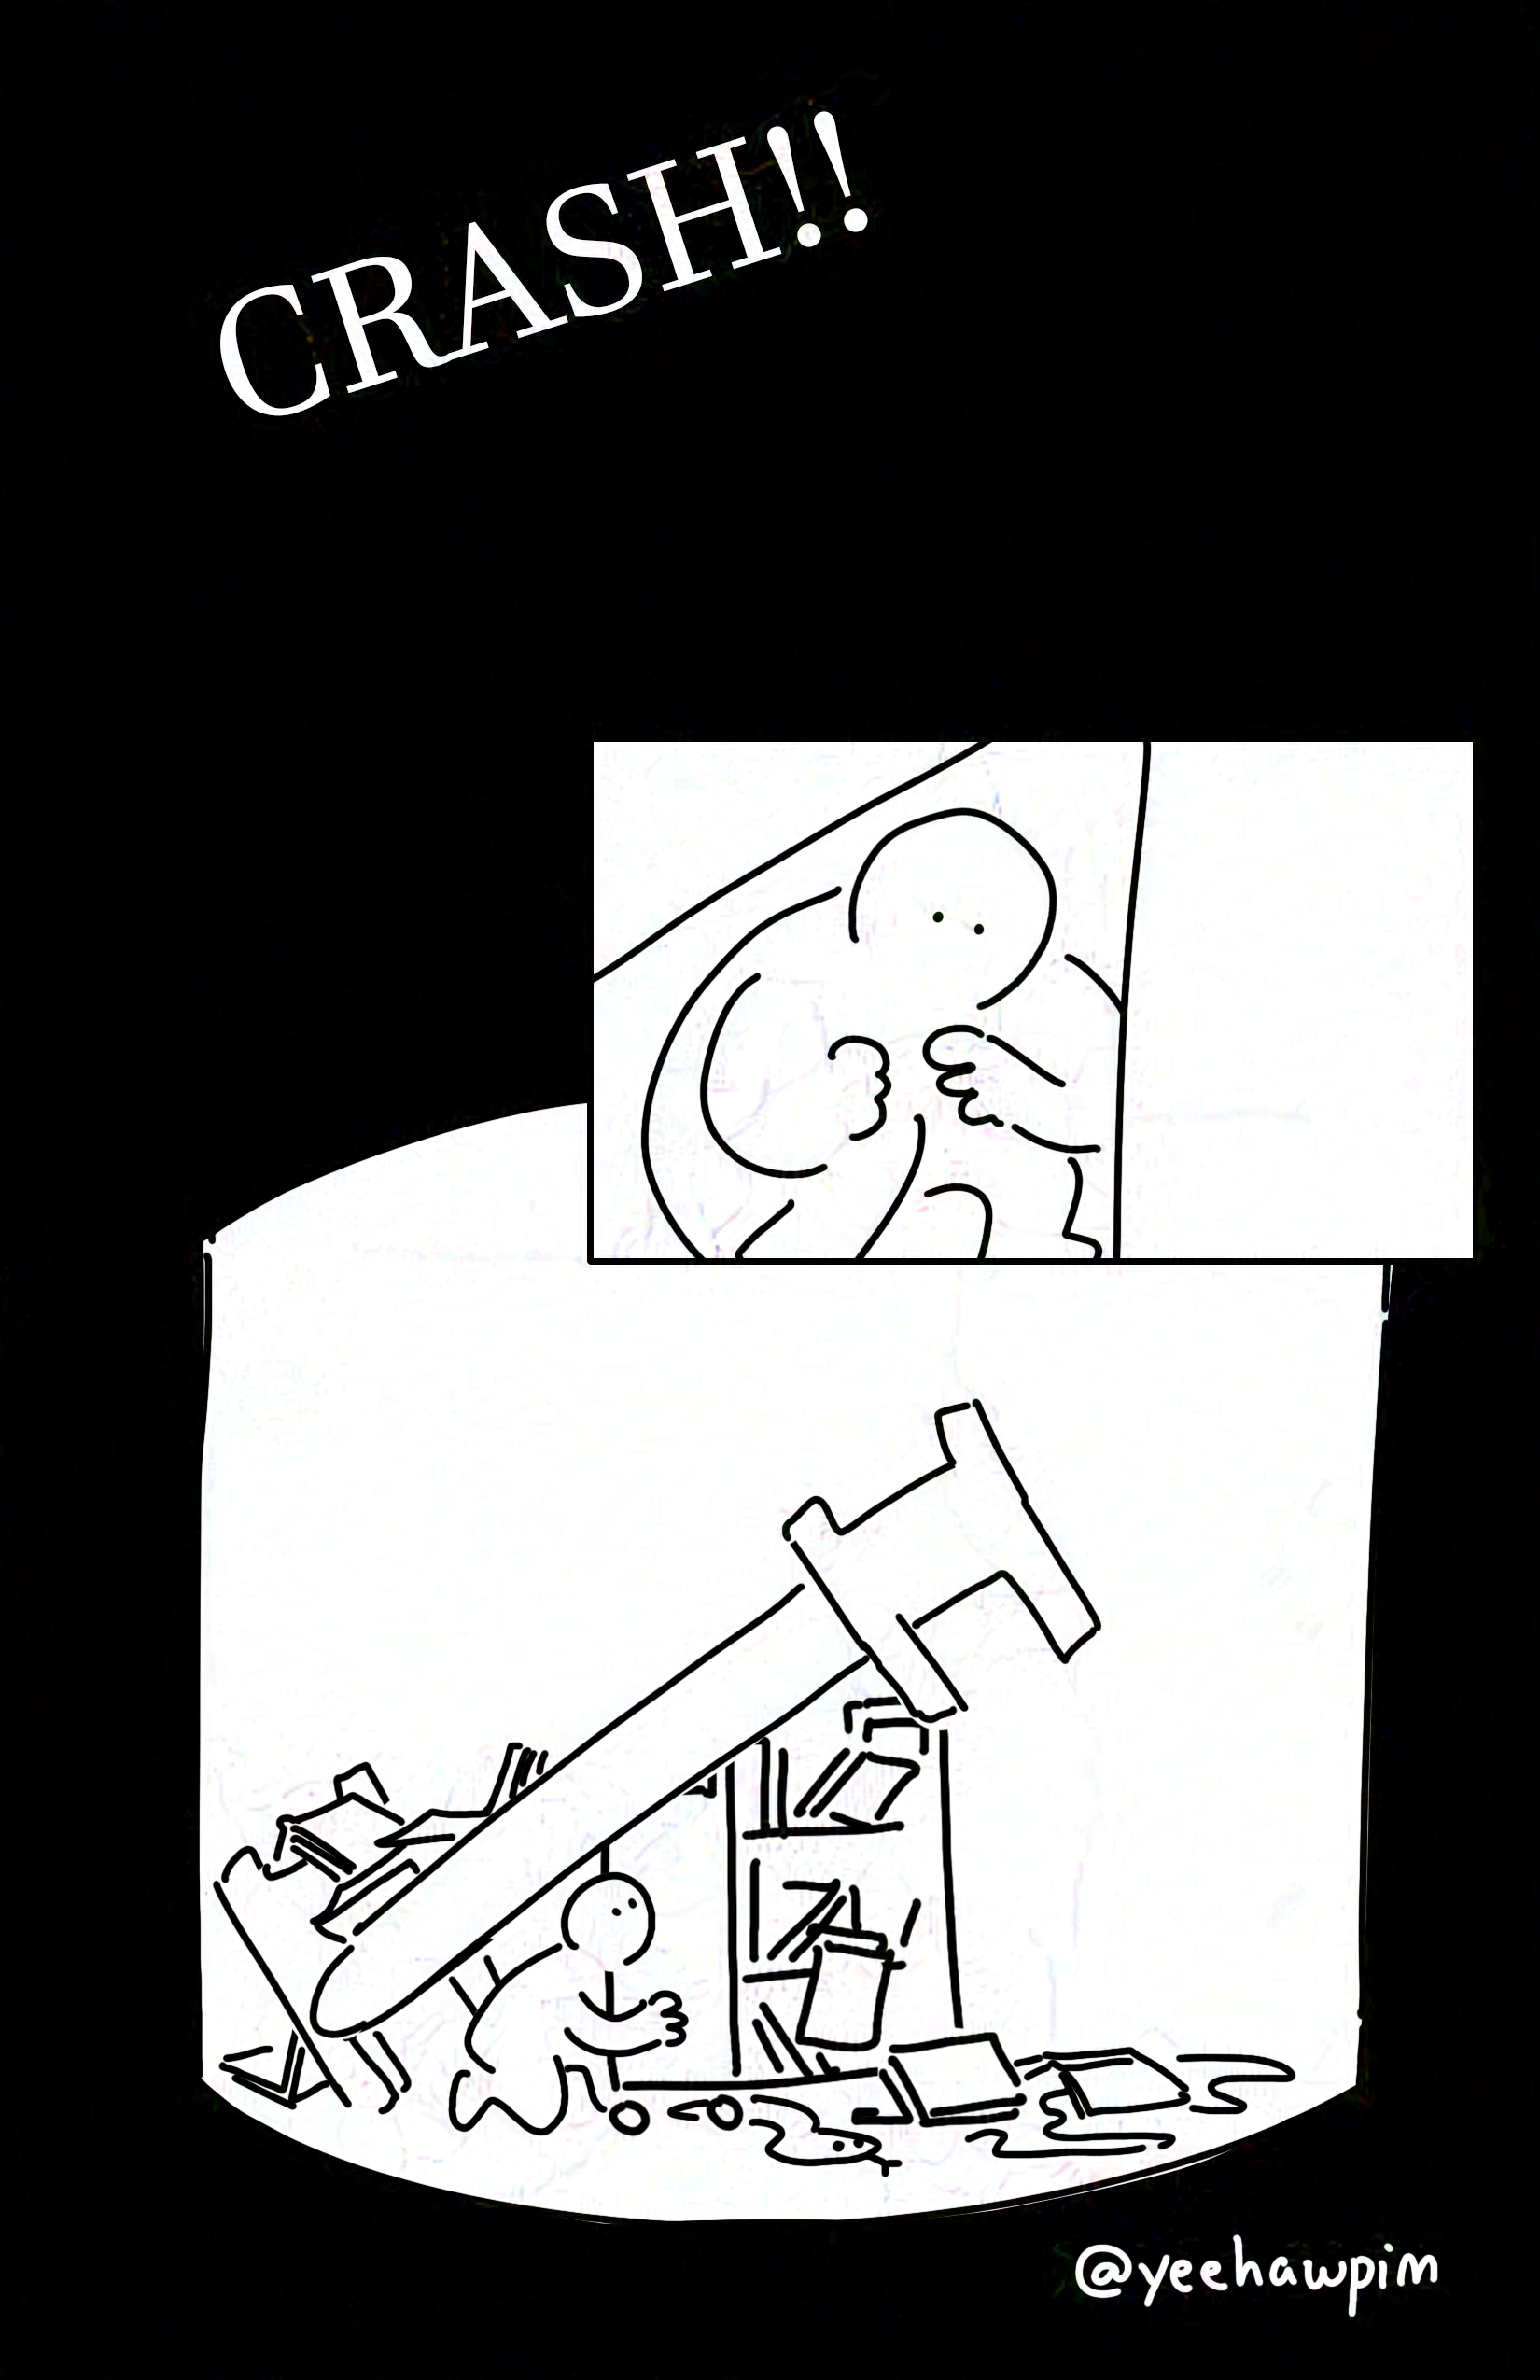 Page background is black with white panels.
Large white text: CRASH!!
Panel 1: The kid with their eyes open crouched in a corner between two large, slanted objects.
Panel 2: The kid crawls out from a pile of things. The cart of books is upright underneath a bed, which has been shifted diagonally with the foot of the bed sticking up in the air. There are books scattered everywhere, on the ground and falling out of the cart as well as towards the head of the bed. There is a white snake plushie on the ground and rope. This is the kid on the right's house from the chapter "house."
Watermark: @yeehawpim